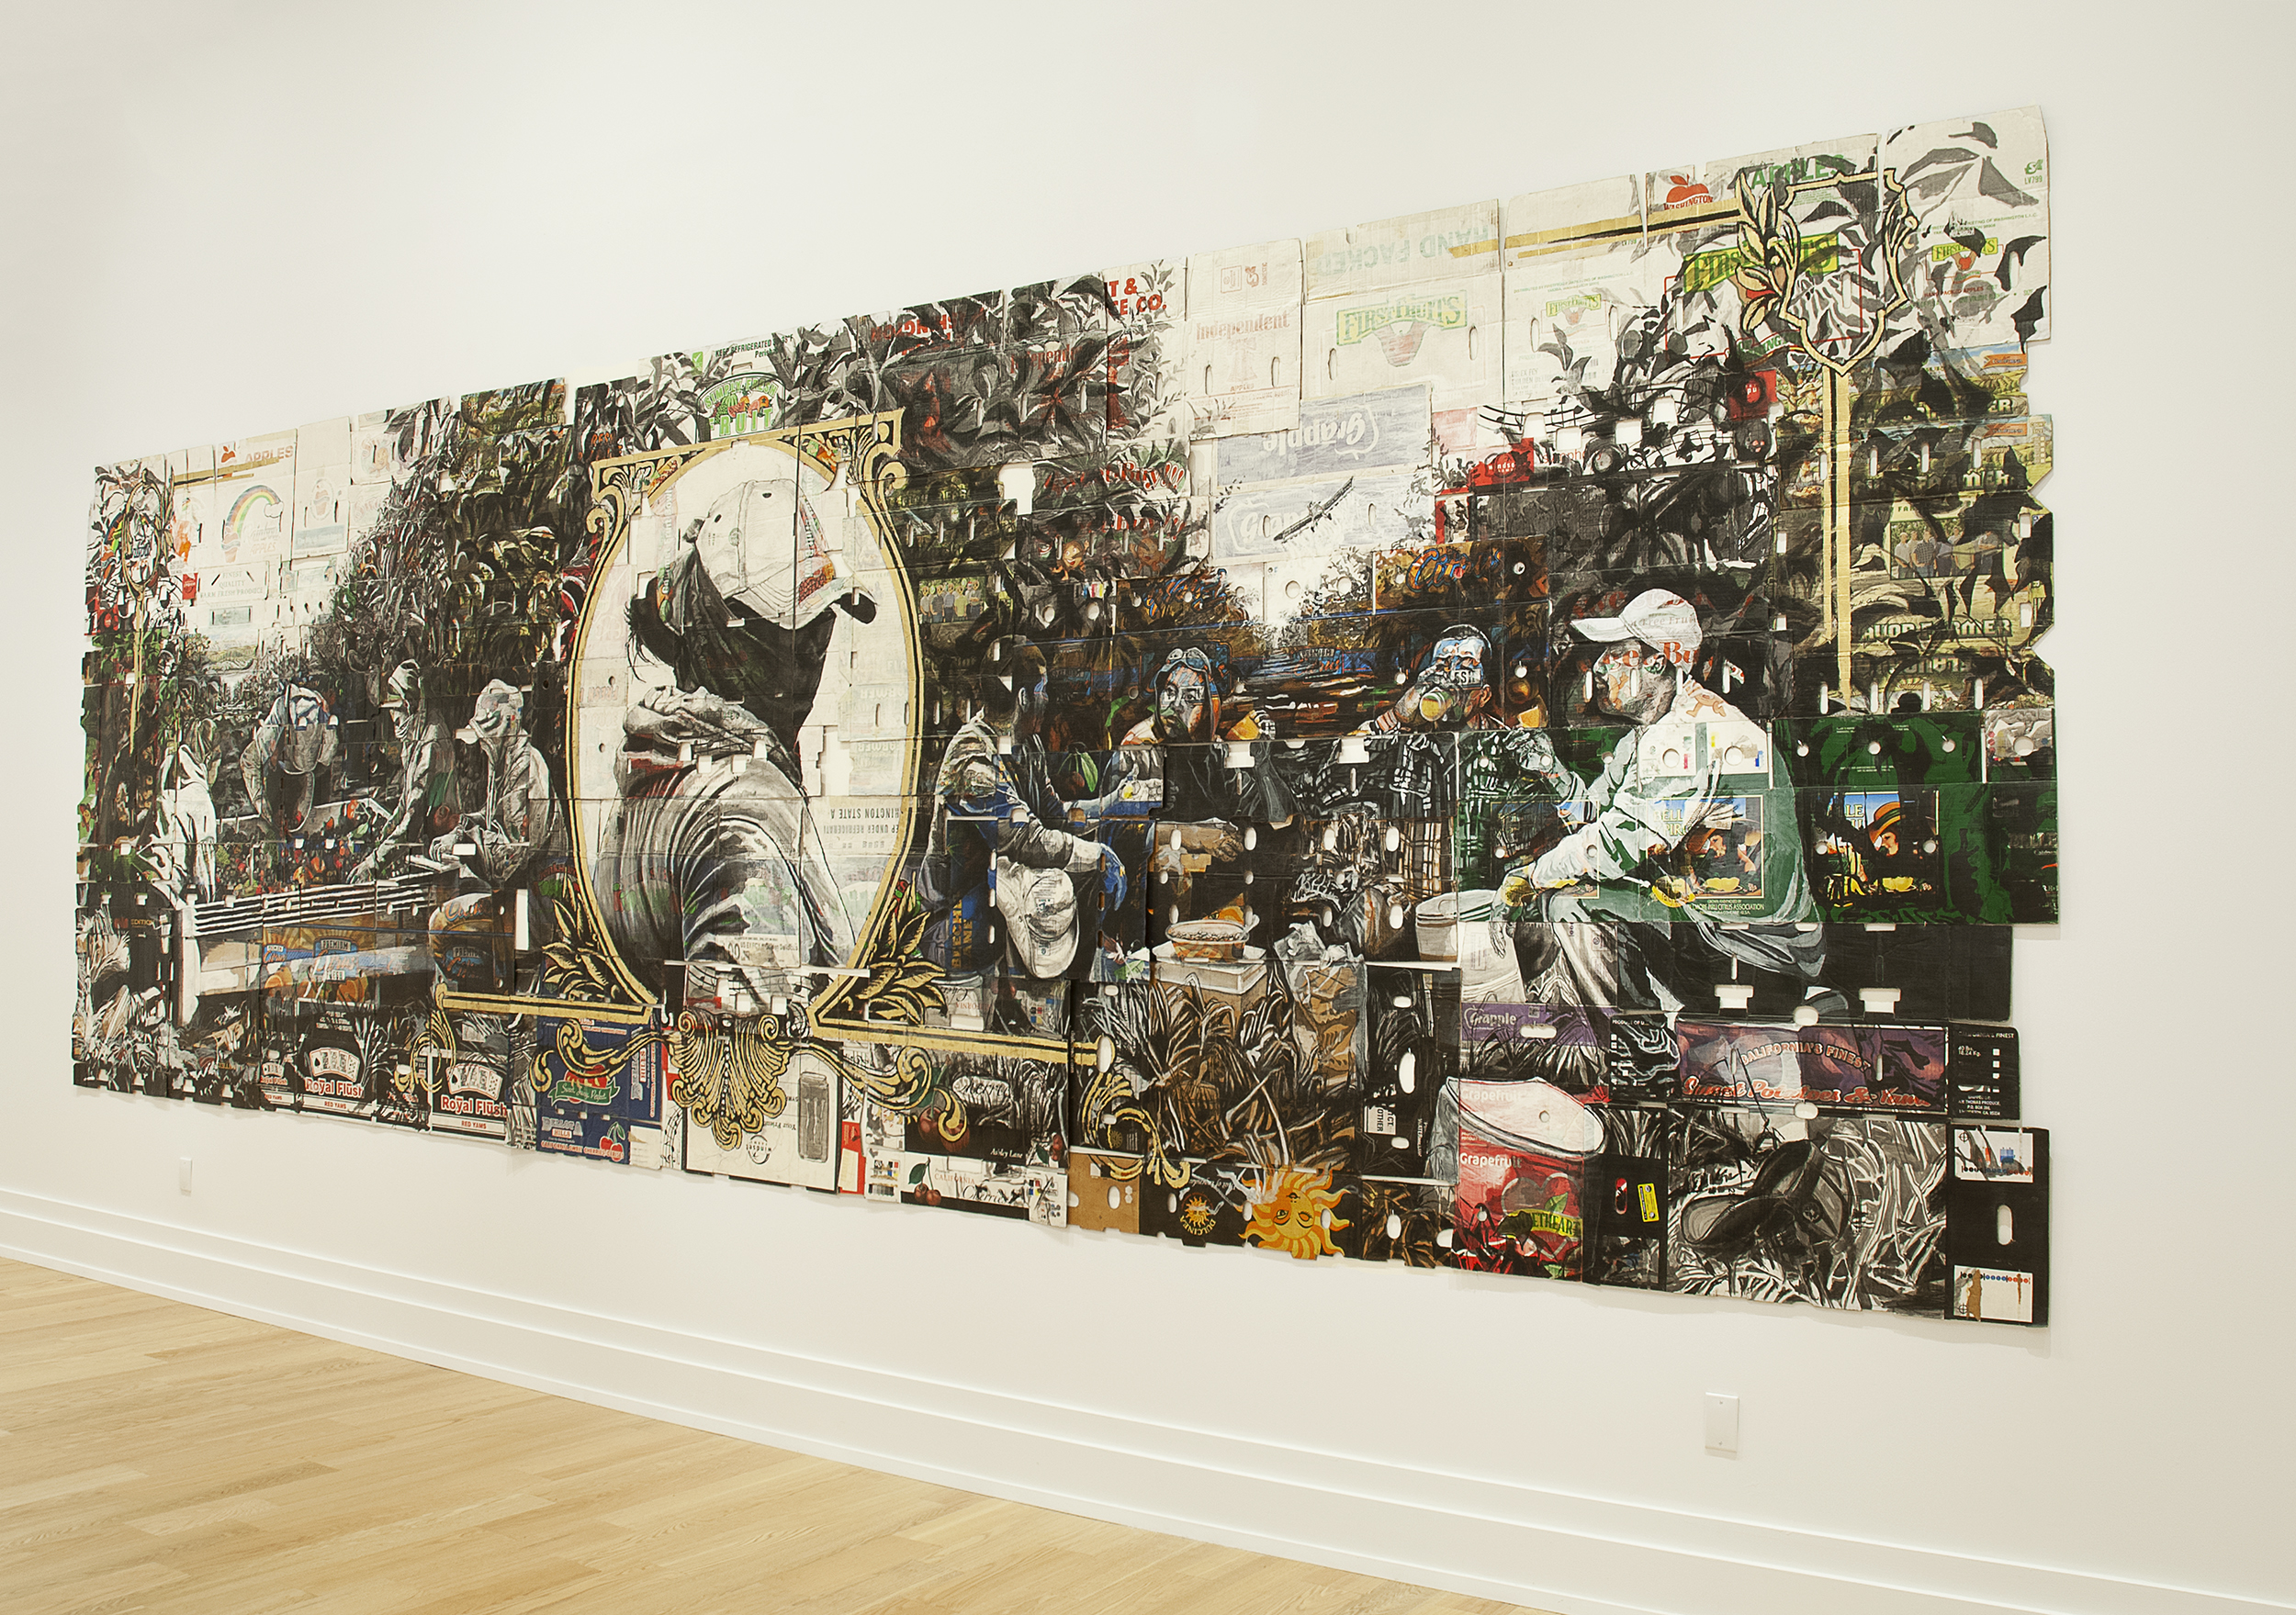 A large artwork takes up most of a wall, mimicking the look of a dollar bill but with imagery calling to agricultural labor in black ink and subdued colors, made on cardboard boxes